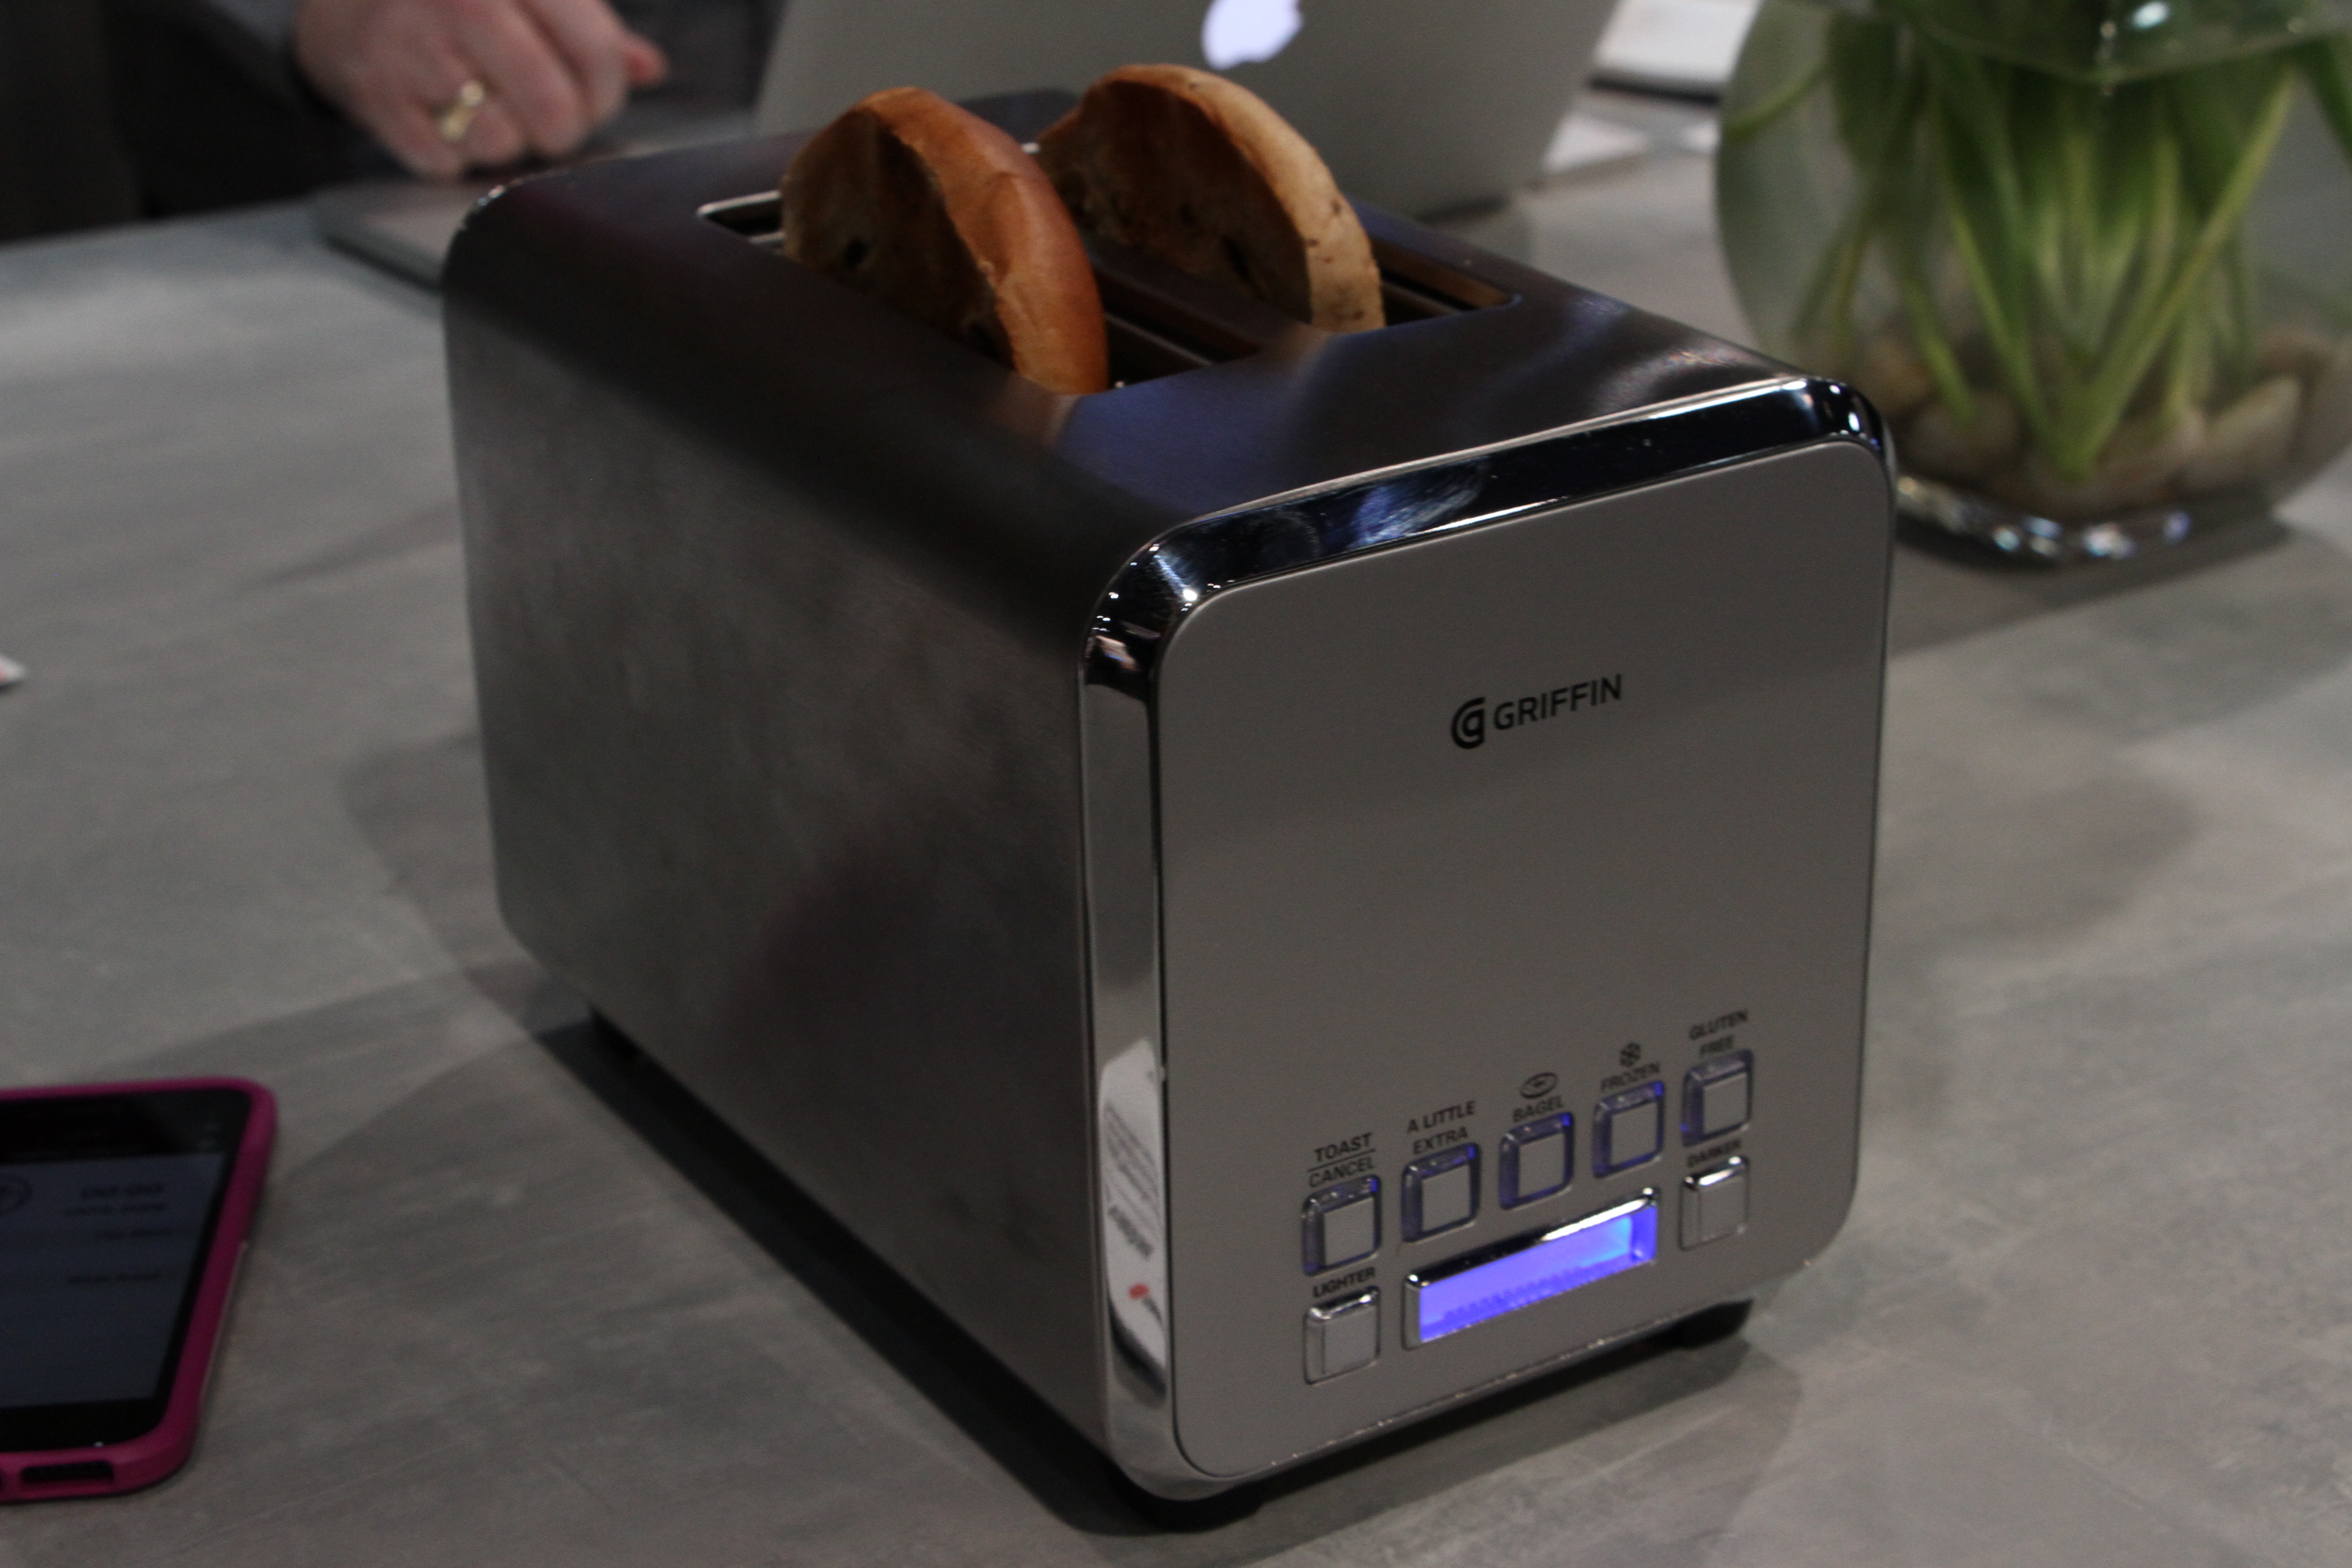 Smart toasters are here